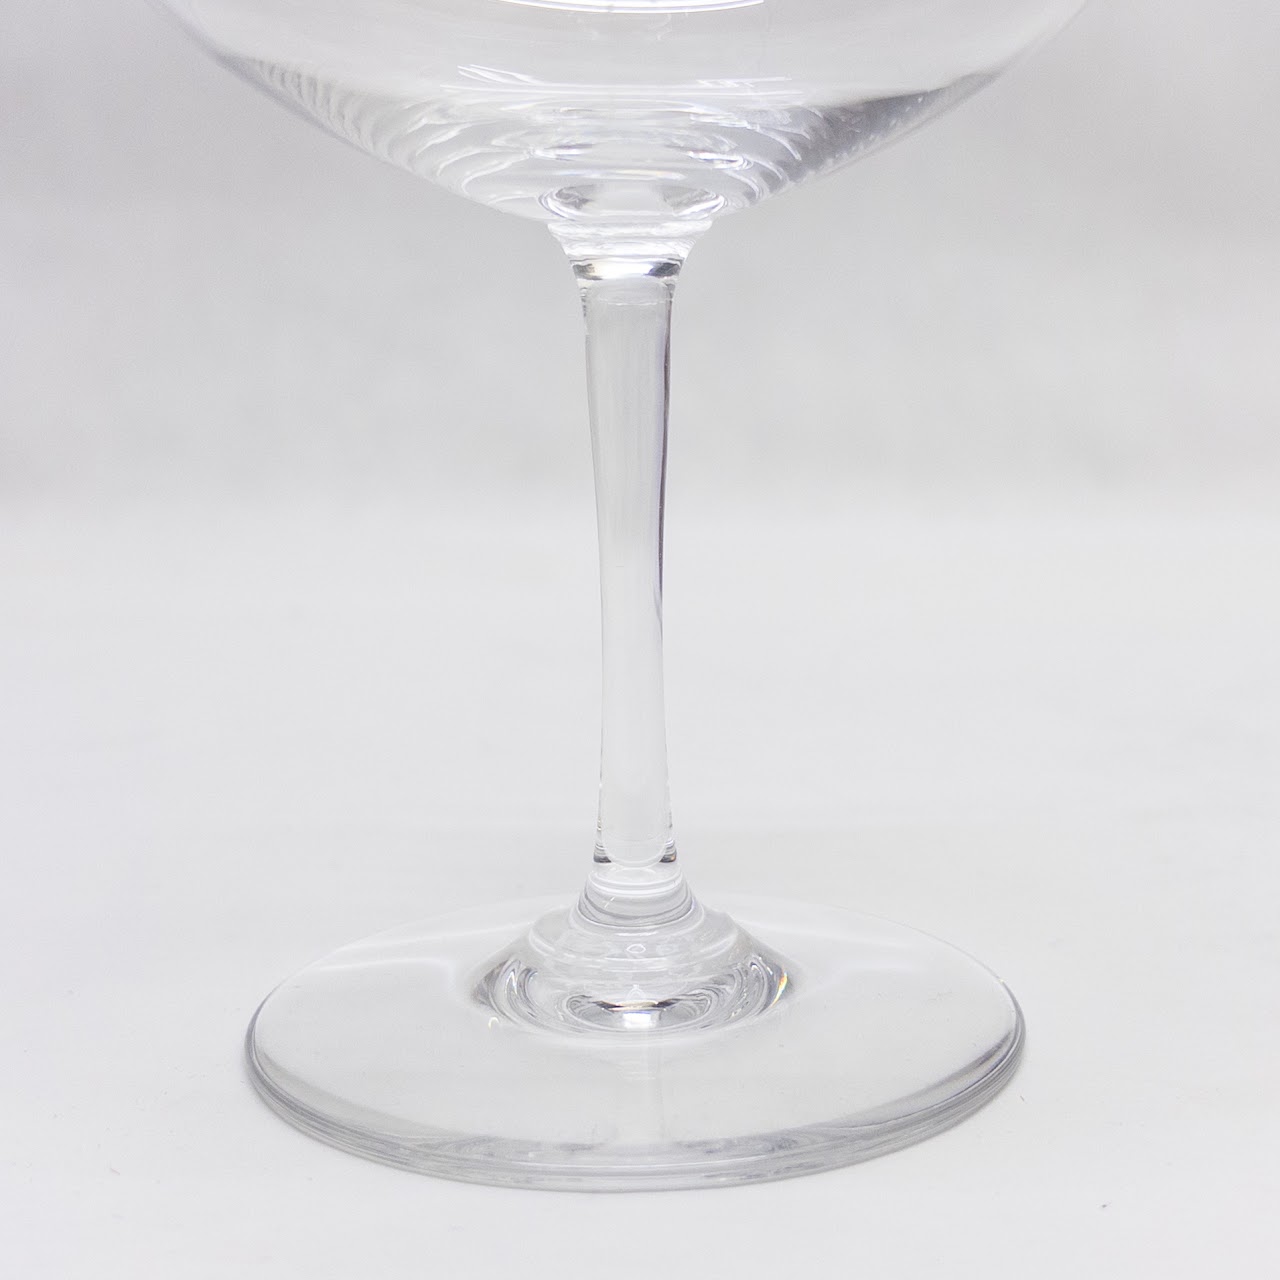 Baccarat Perfection Coupe Glass Pair # 4